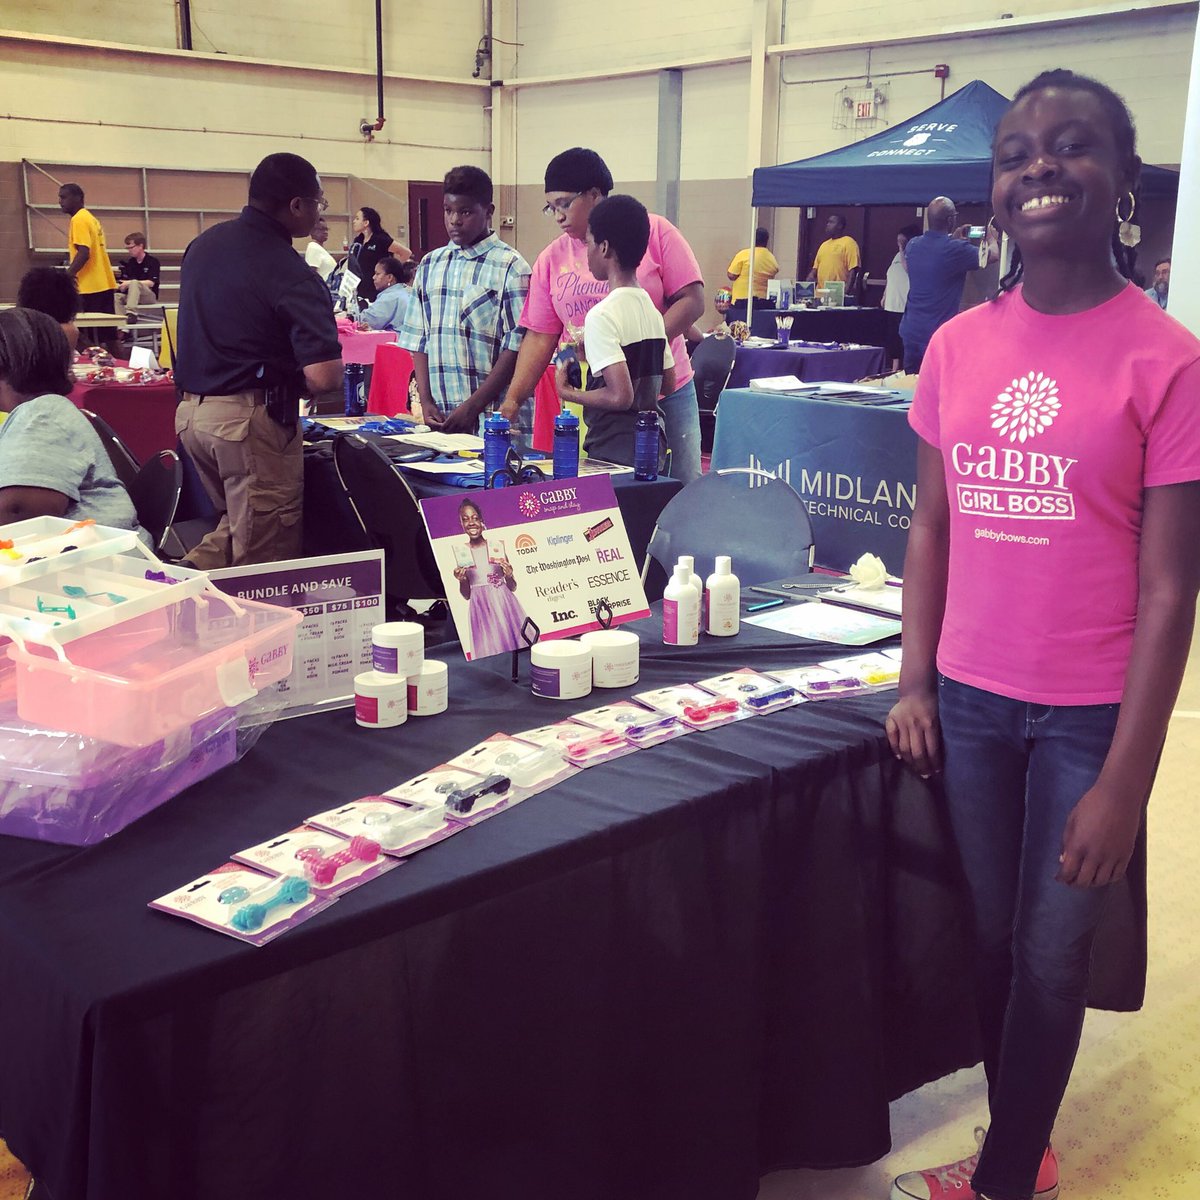 COLUMBIA! Come meet GaBBY at DreamPossible until 5pm TODAY! #gabbybows